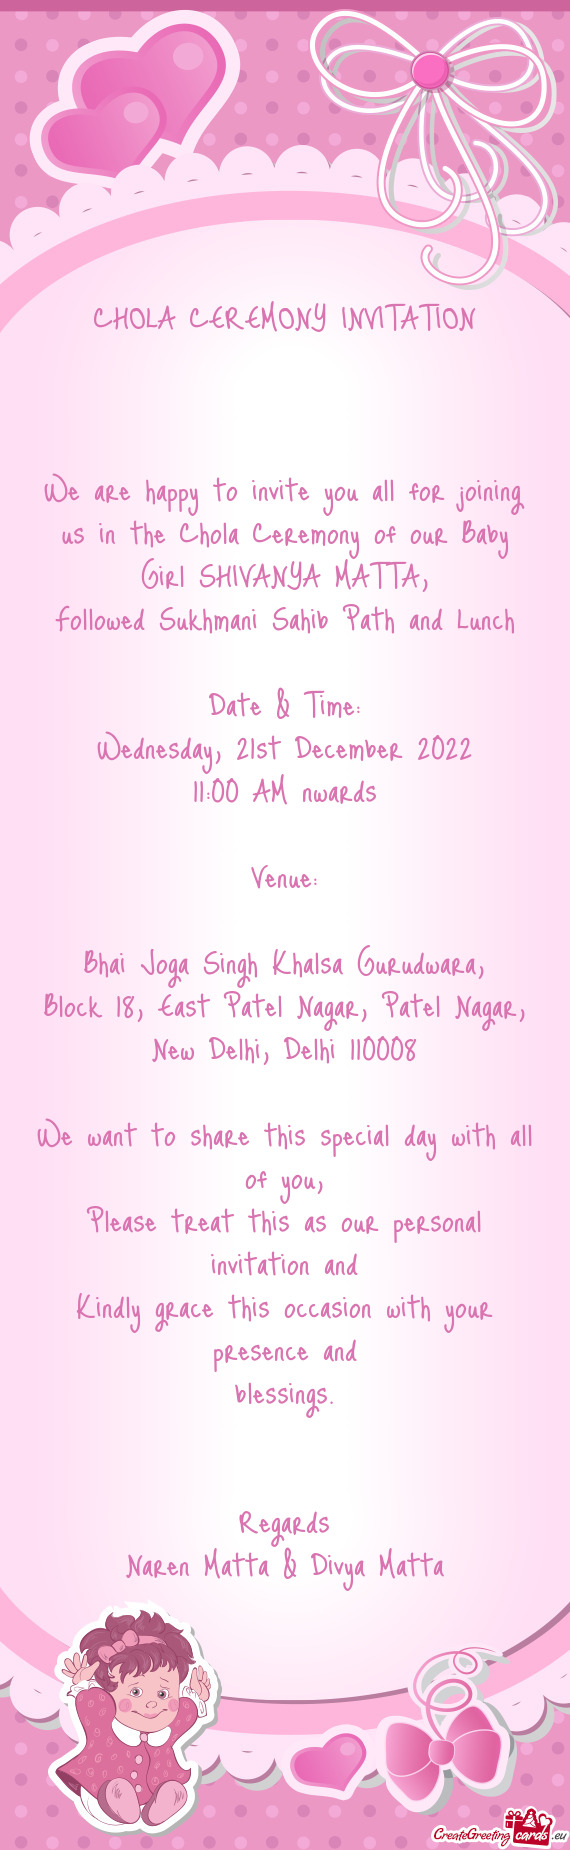 We are happy to invite you all for joining us in the Chola Ceremony of our Baby Girl SHIVANYA MATTA